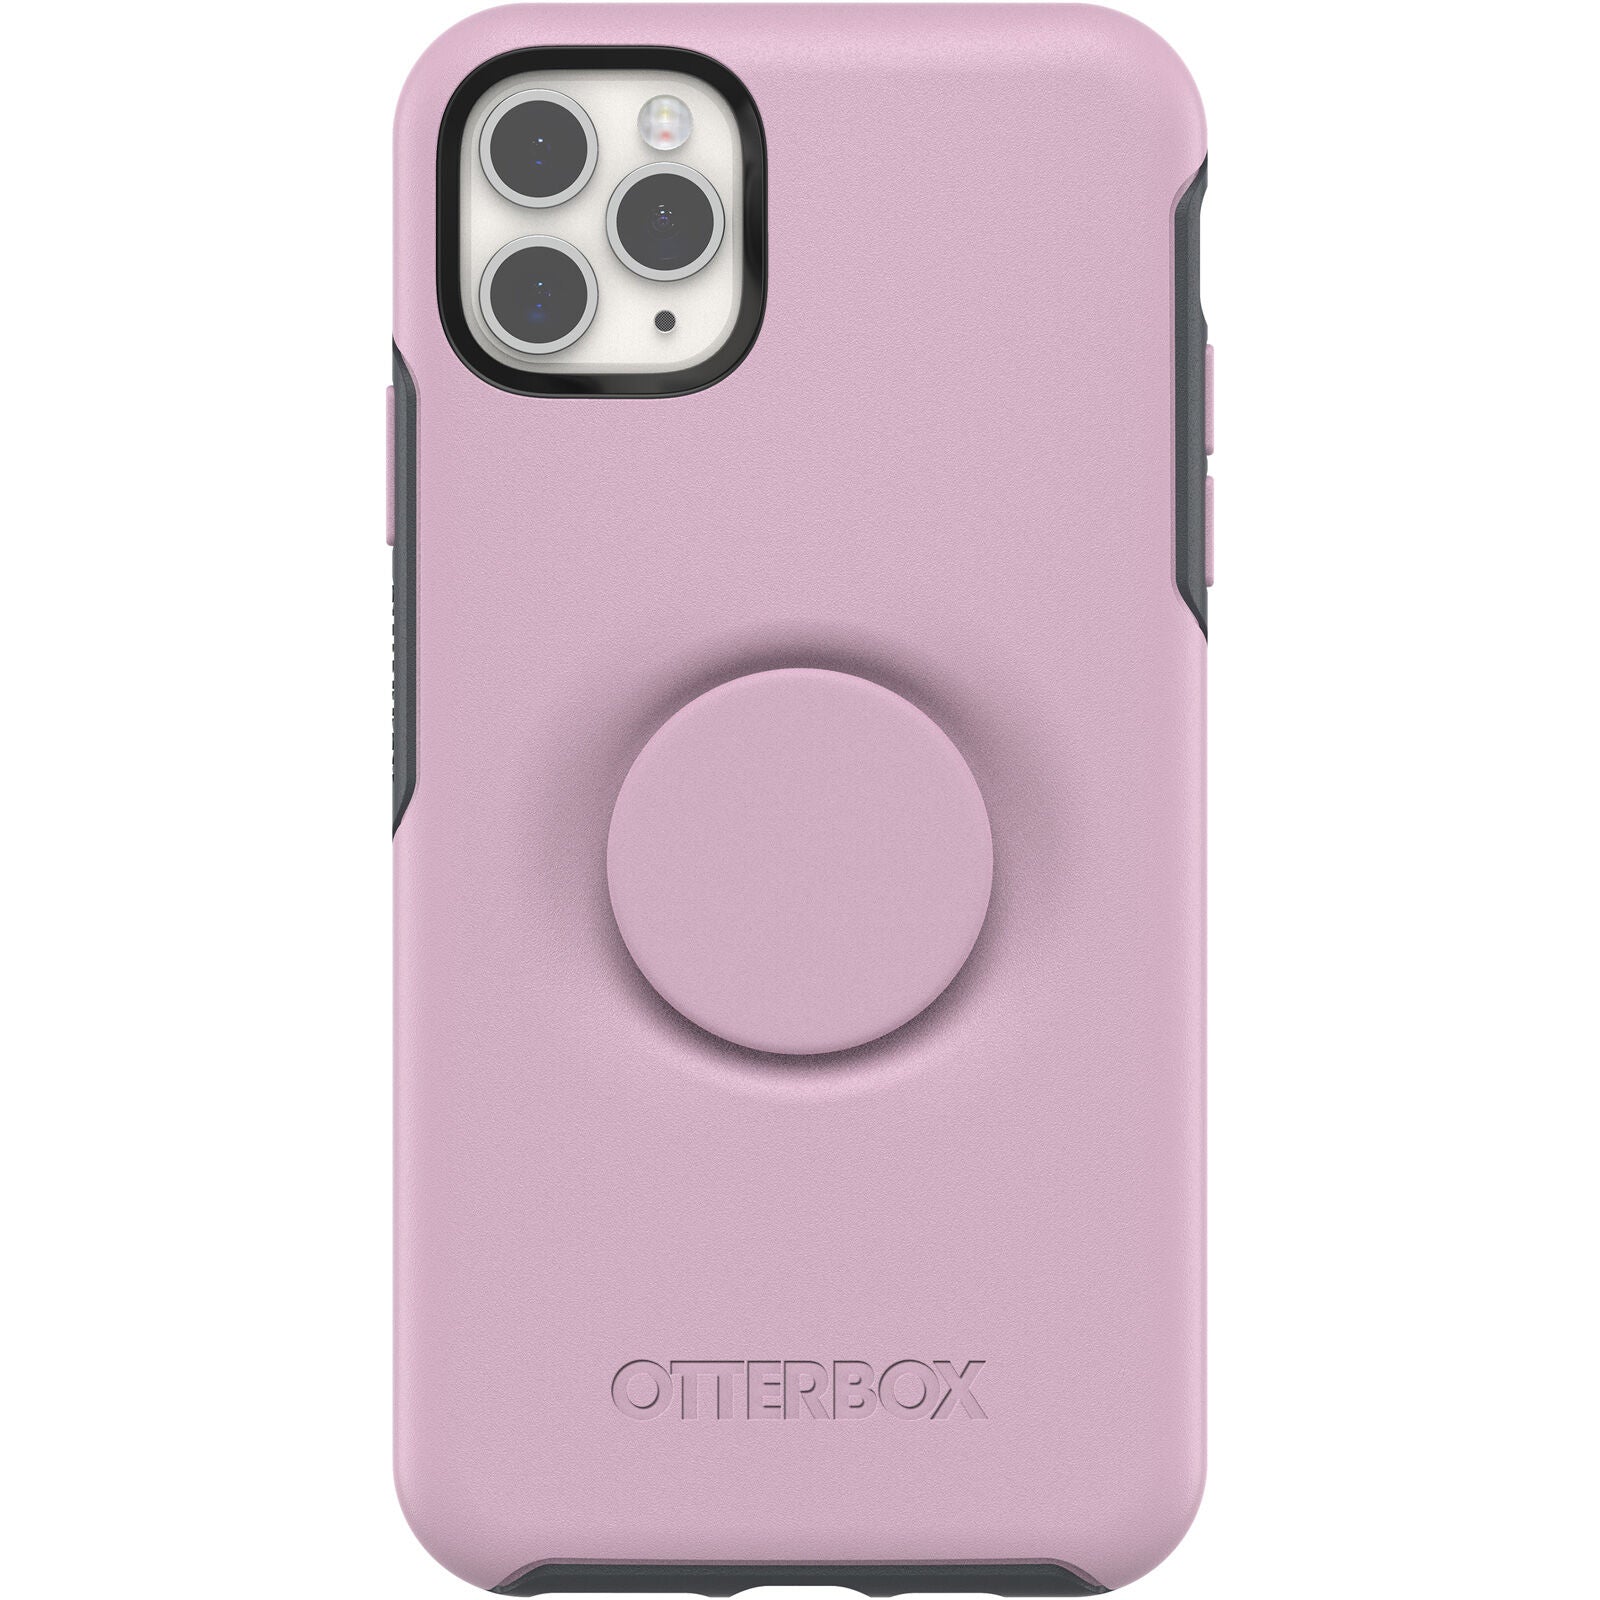 OtterBox + POP Case for Apple iPhone 11 Pro Max - Pink (New)